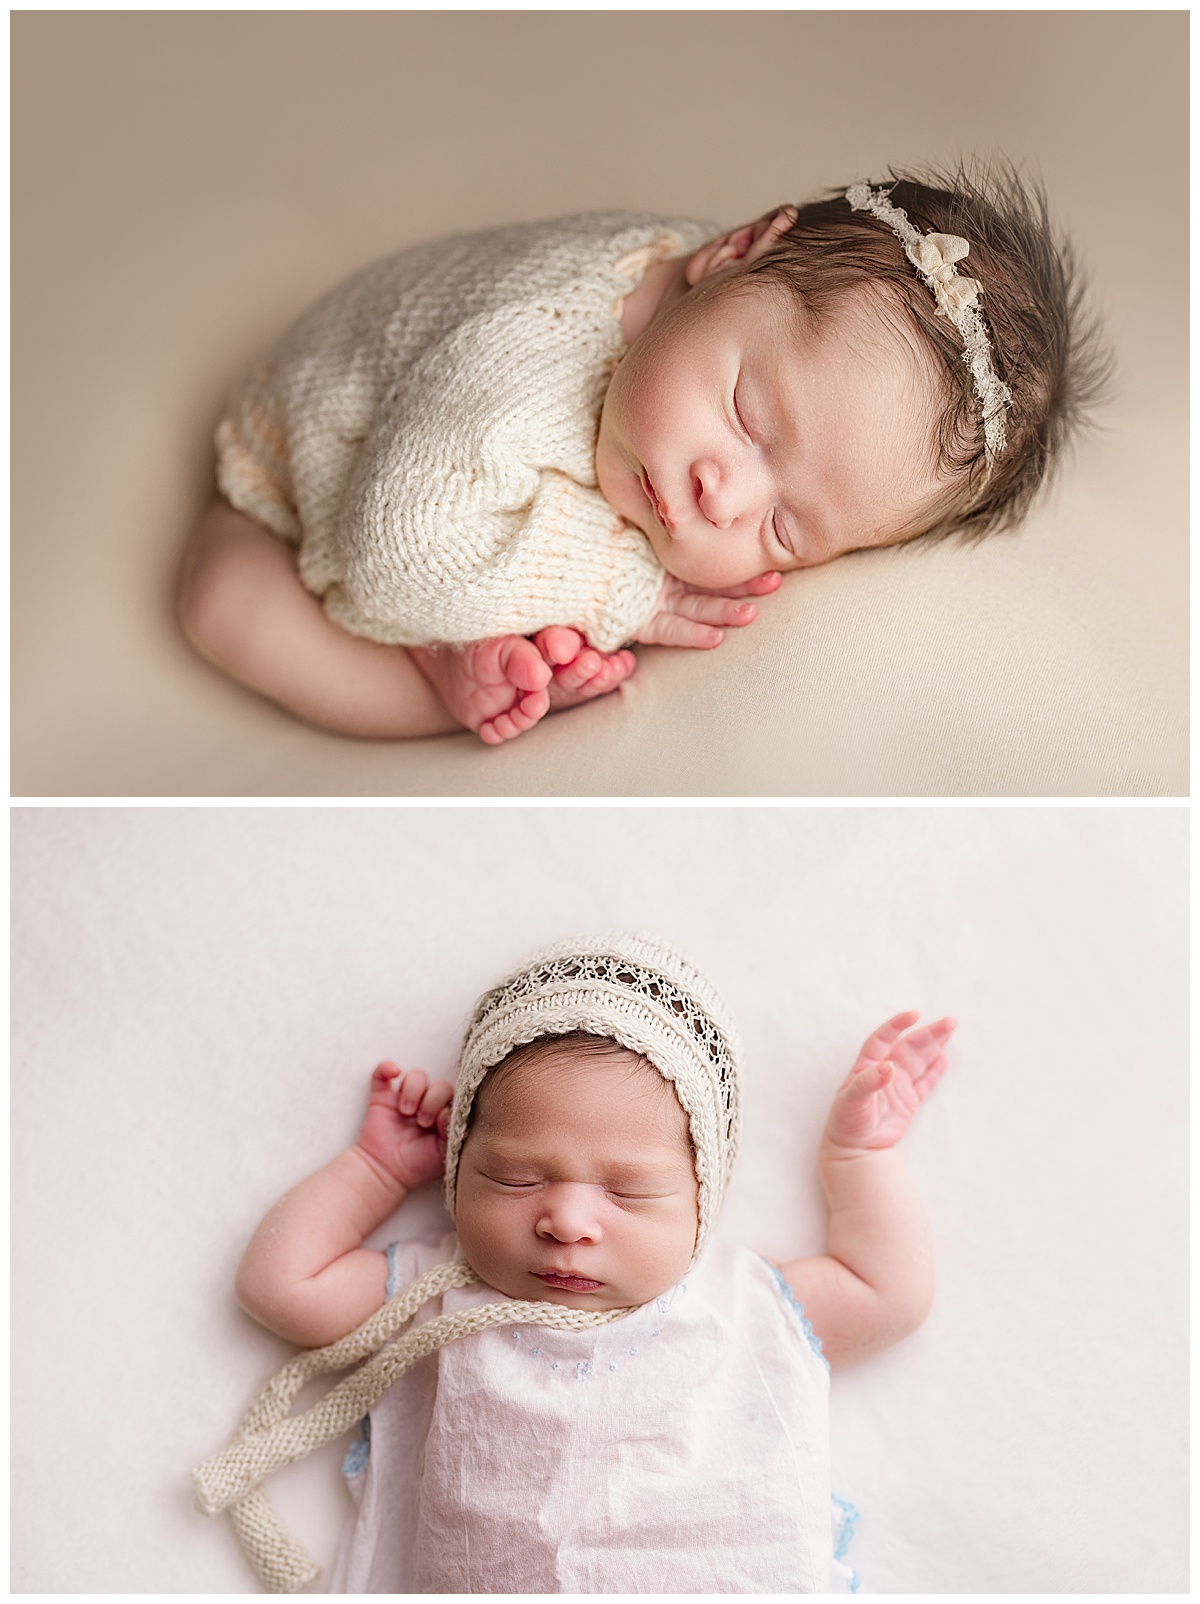 Infant lays on back and belly for Norma Fayak Photography